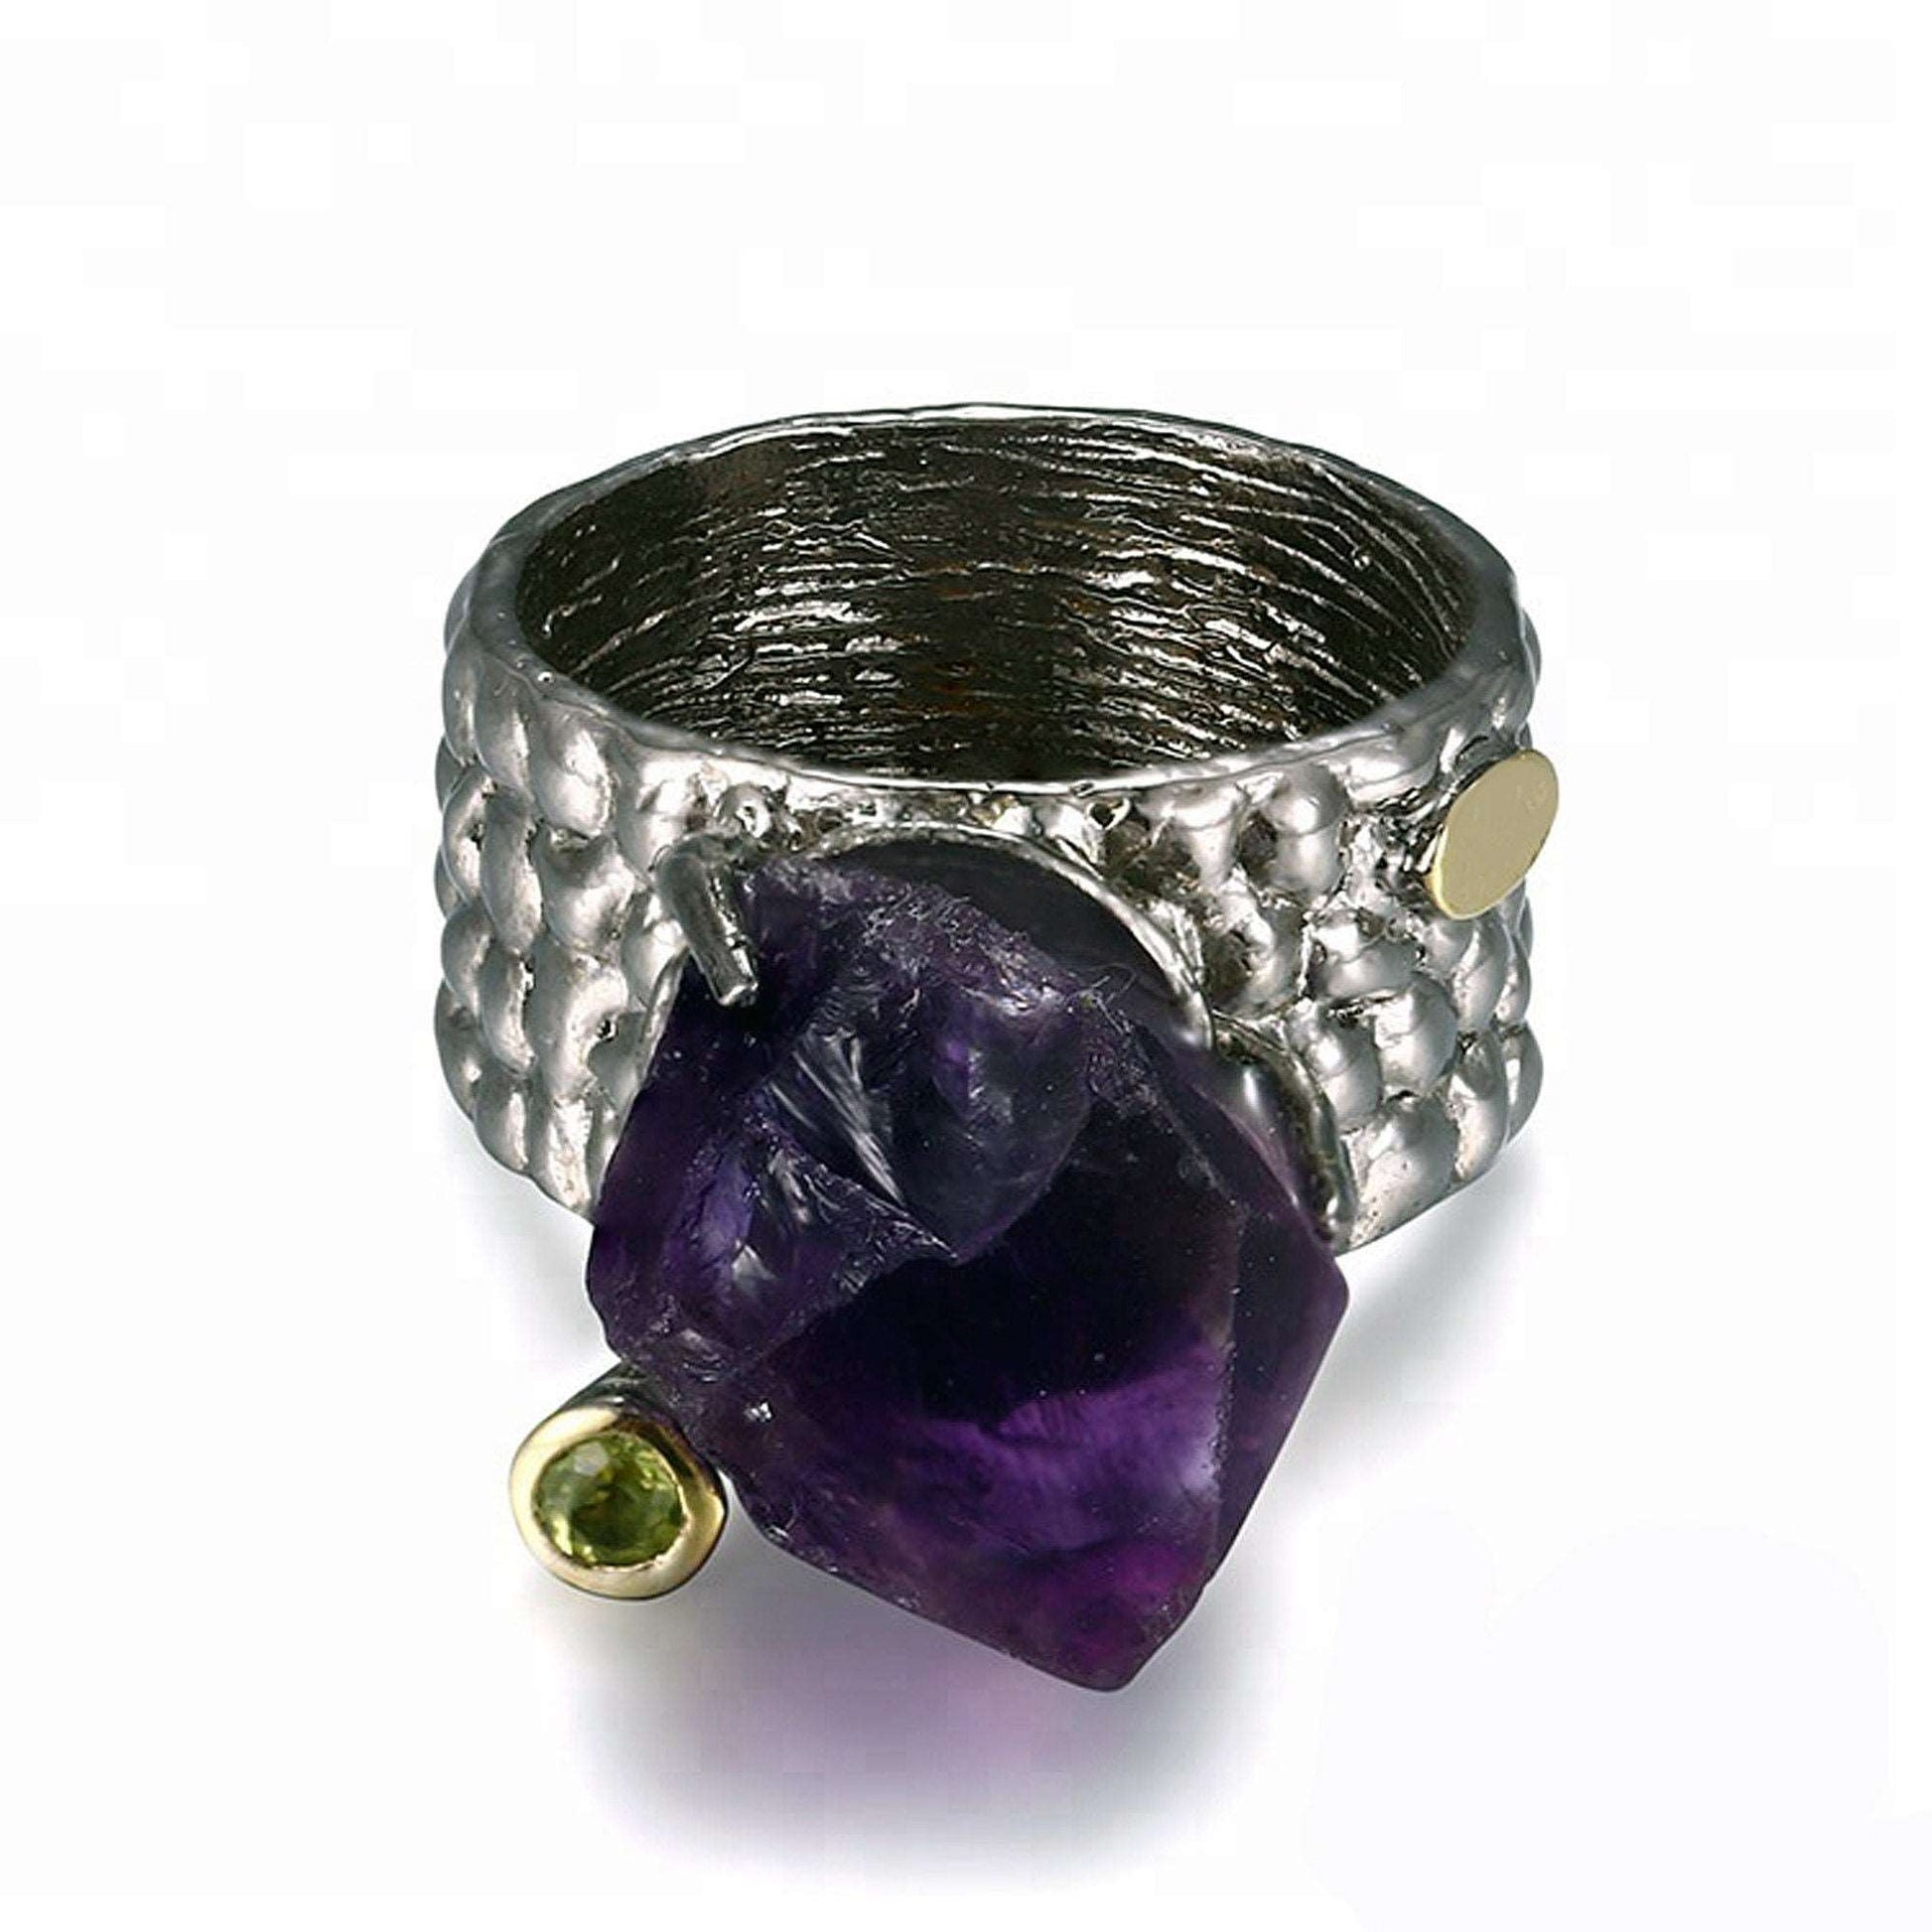 Large uncut amethyst stone in sterling silver ring - Providence silver gold jewelry usa